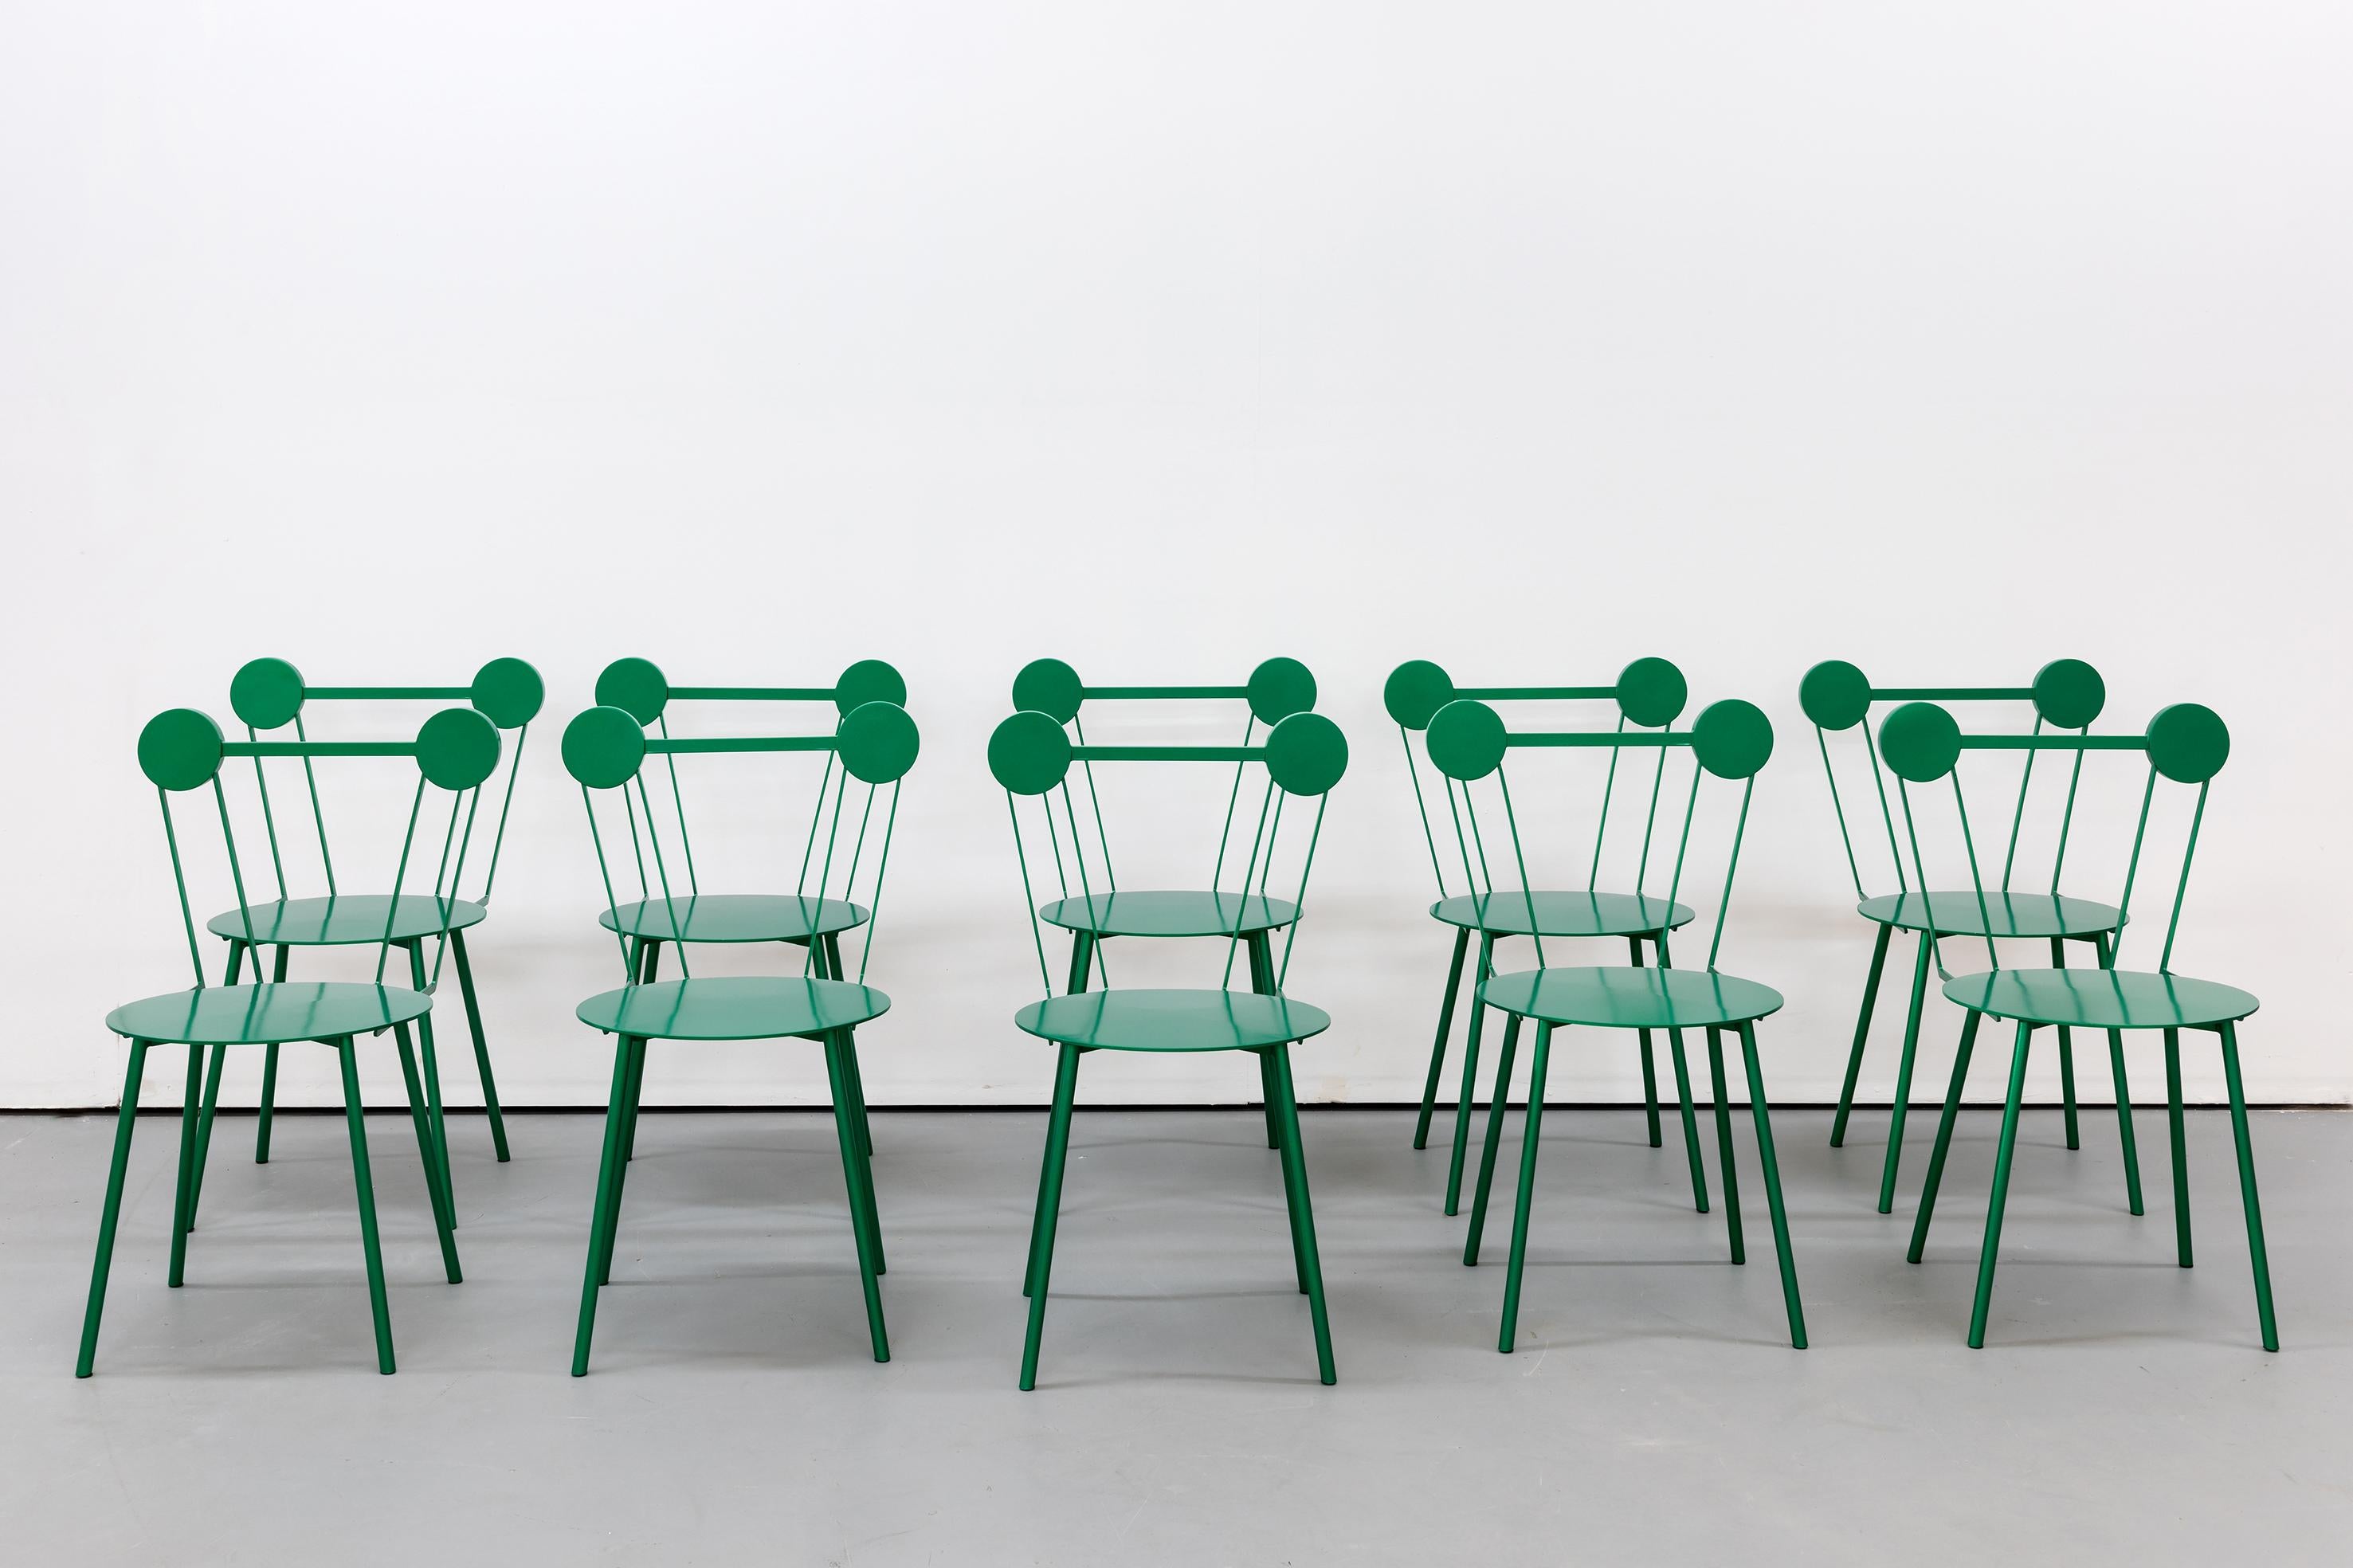 Contemporary Chair Green Haly Aluminium by Chapel Petrassi In New Condition For Sale In Le Perreux-sur-Marne, FR